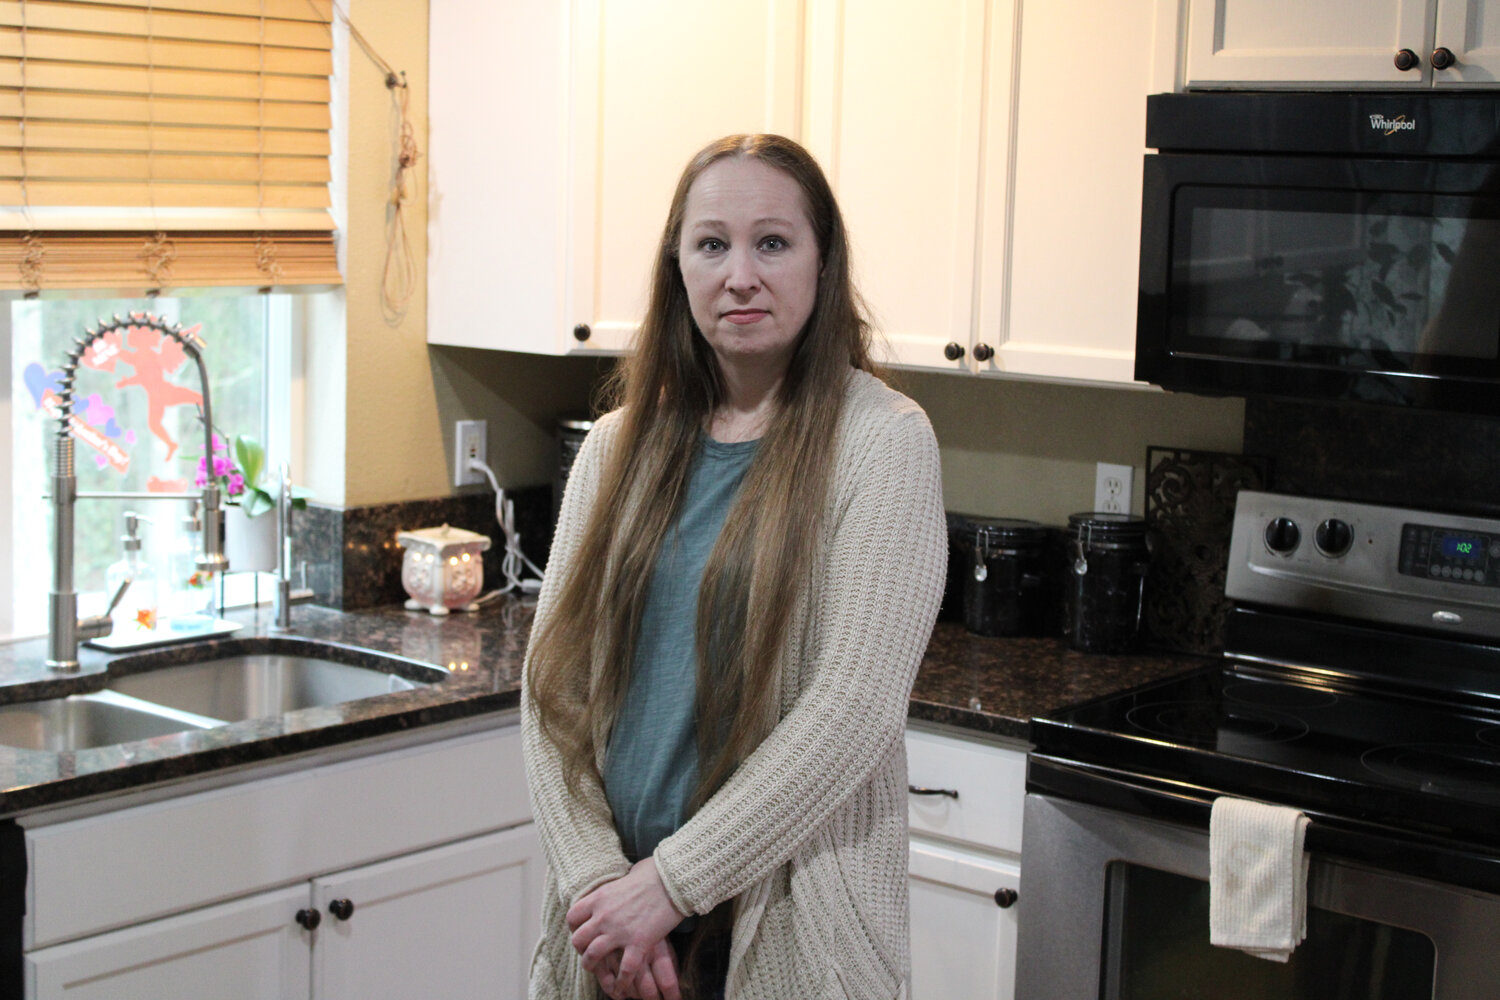 Dee Ragsdale, owner of Whimsy Cakes by Dee, poses in her kitchen on Jan. 29.